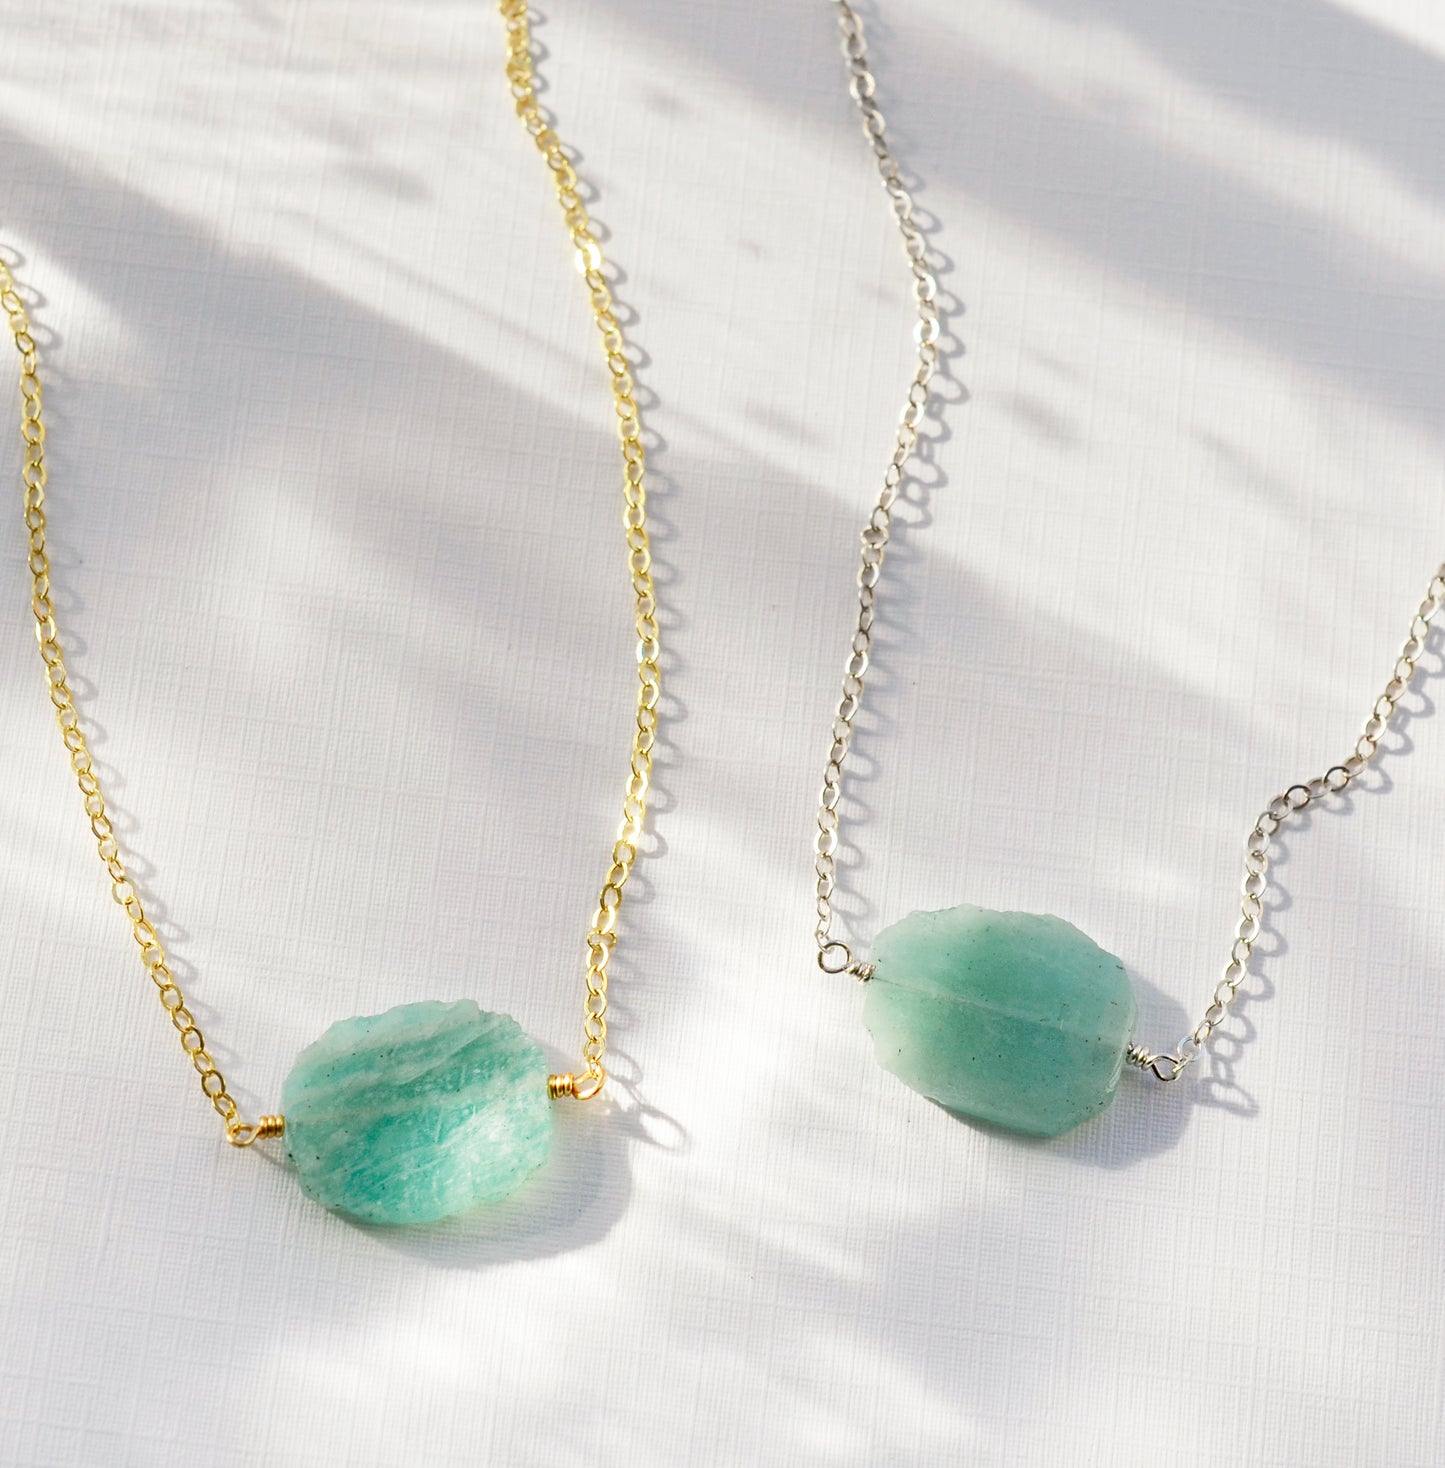 Aqua blue amazonite slice gemstone set onto a 14k gold filled chain. The stone is semi oval in shape, but irregular. It's smooth polished, but with raw edges. Both the silver and gold style are shown.